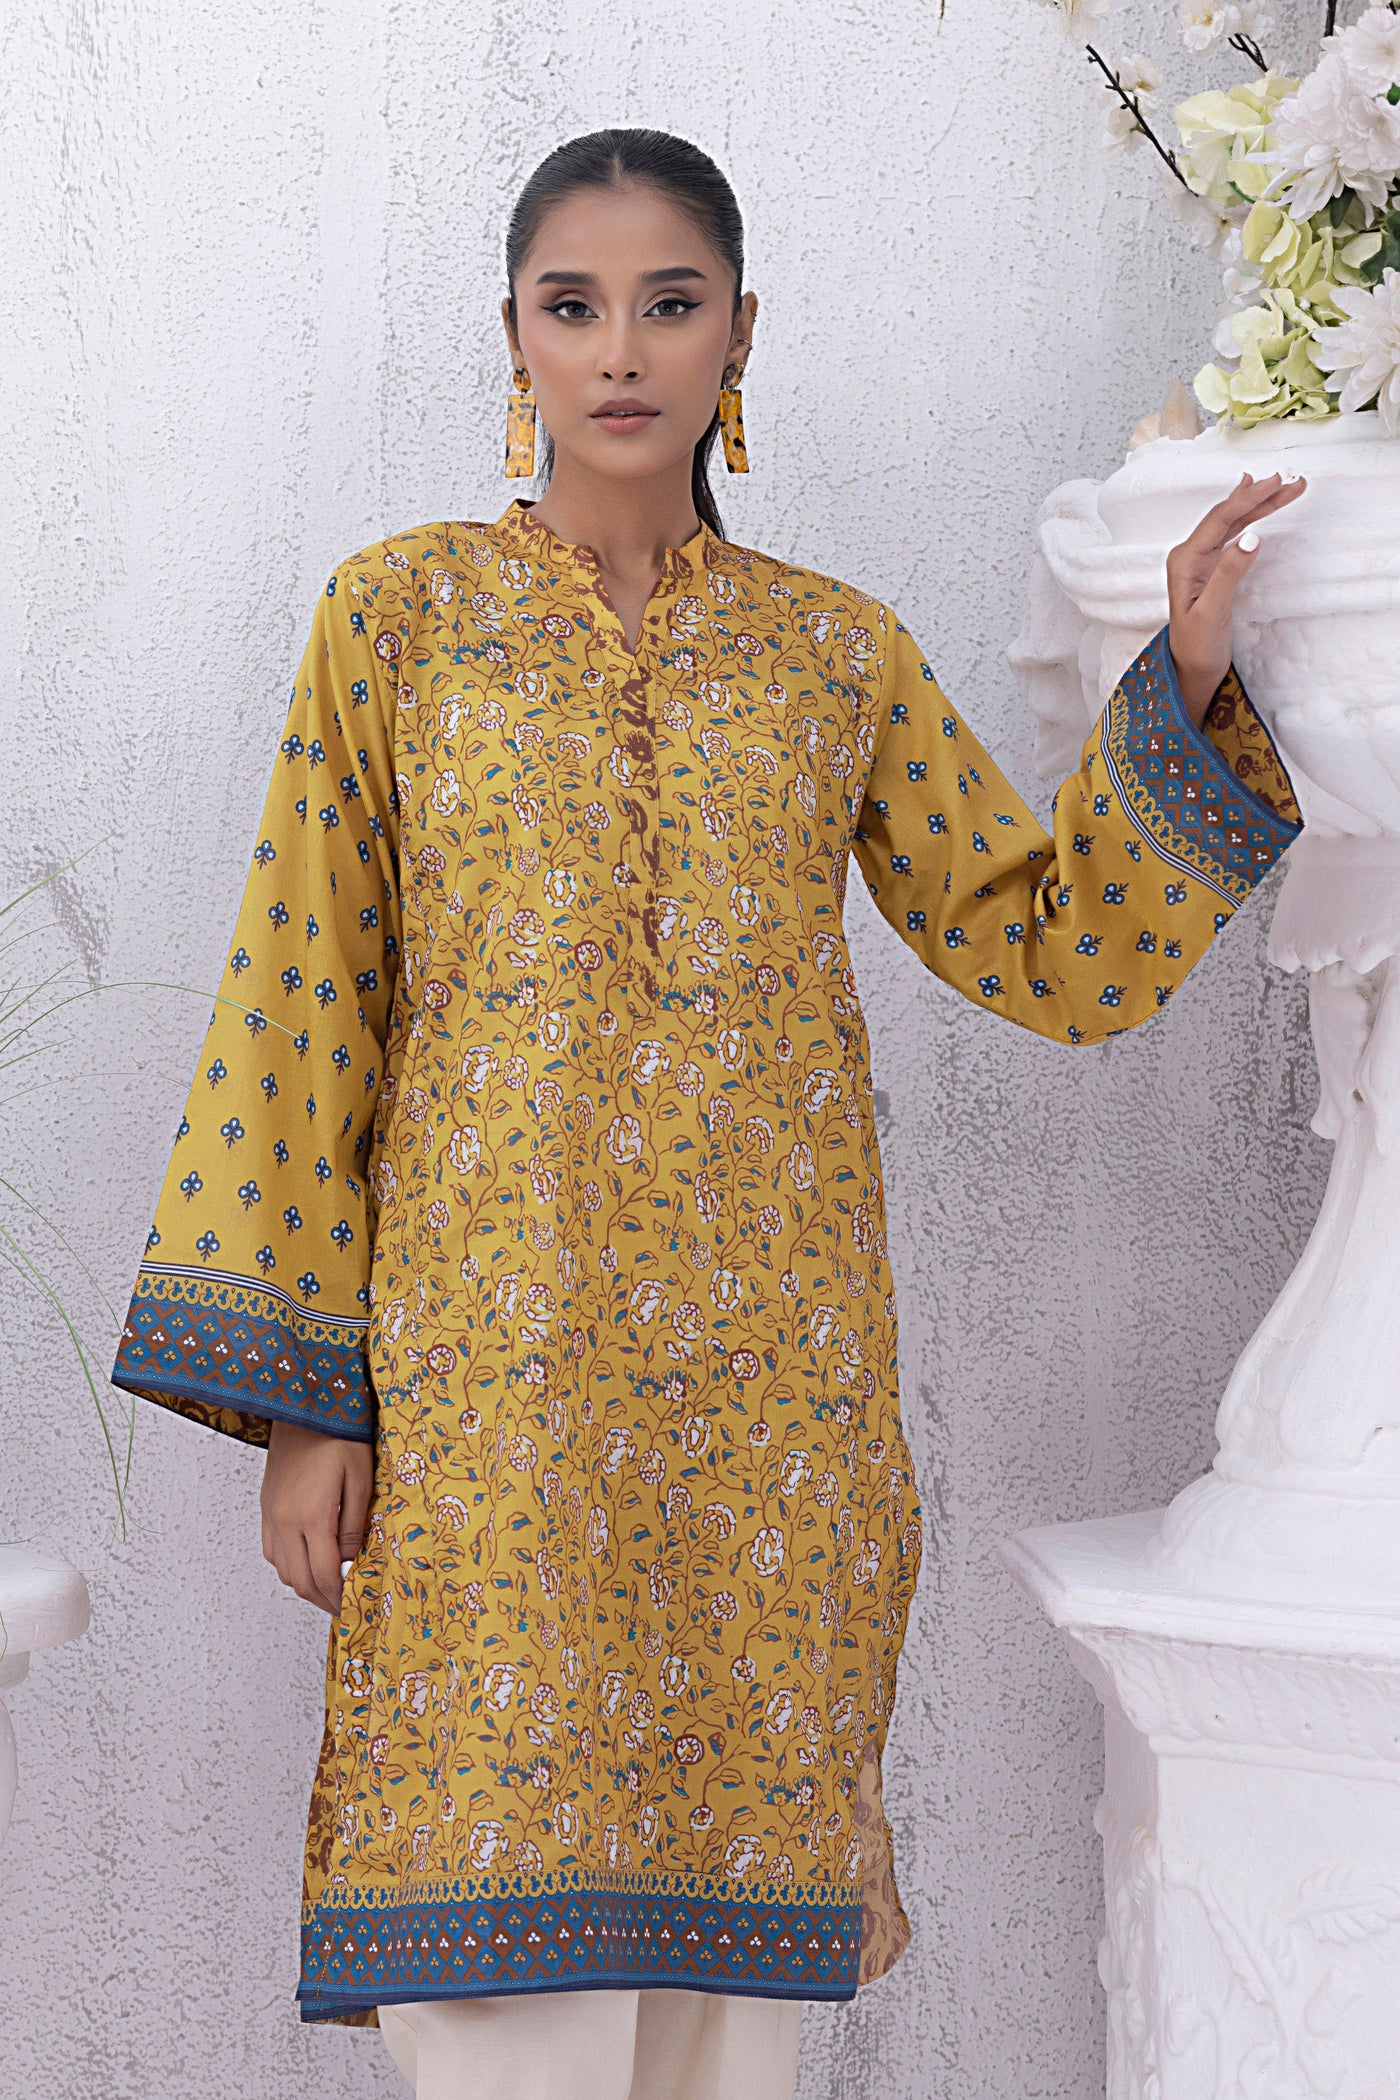 Lakhany 01 Piece Unstitched Printed Lawn Shirt - LG-SR-0202